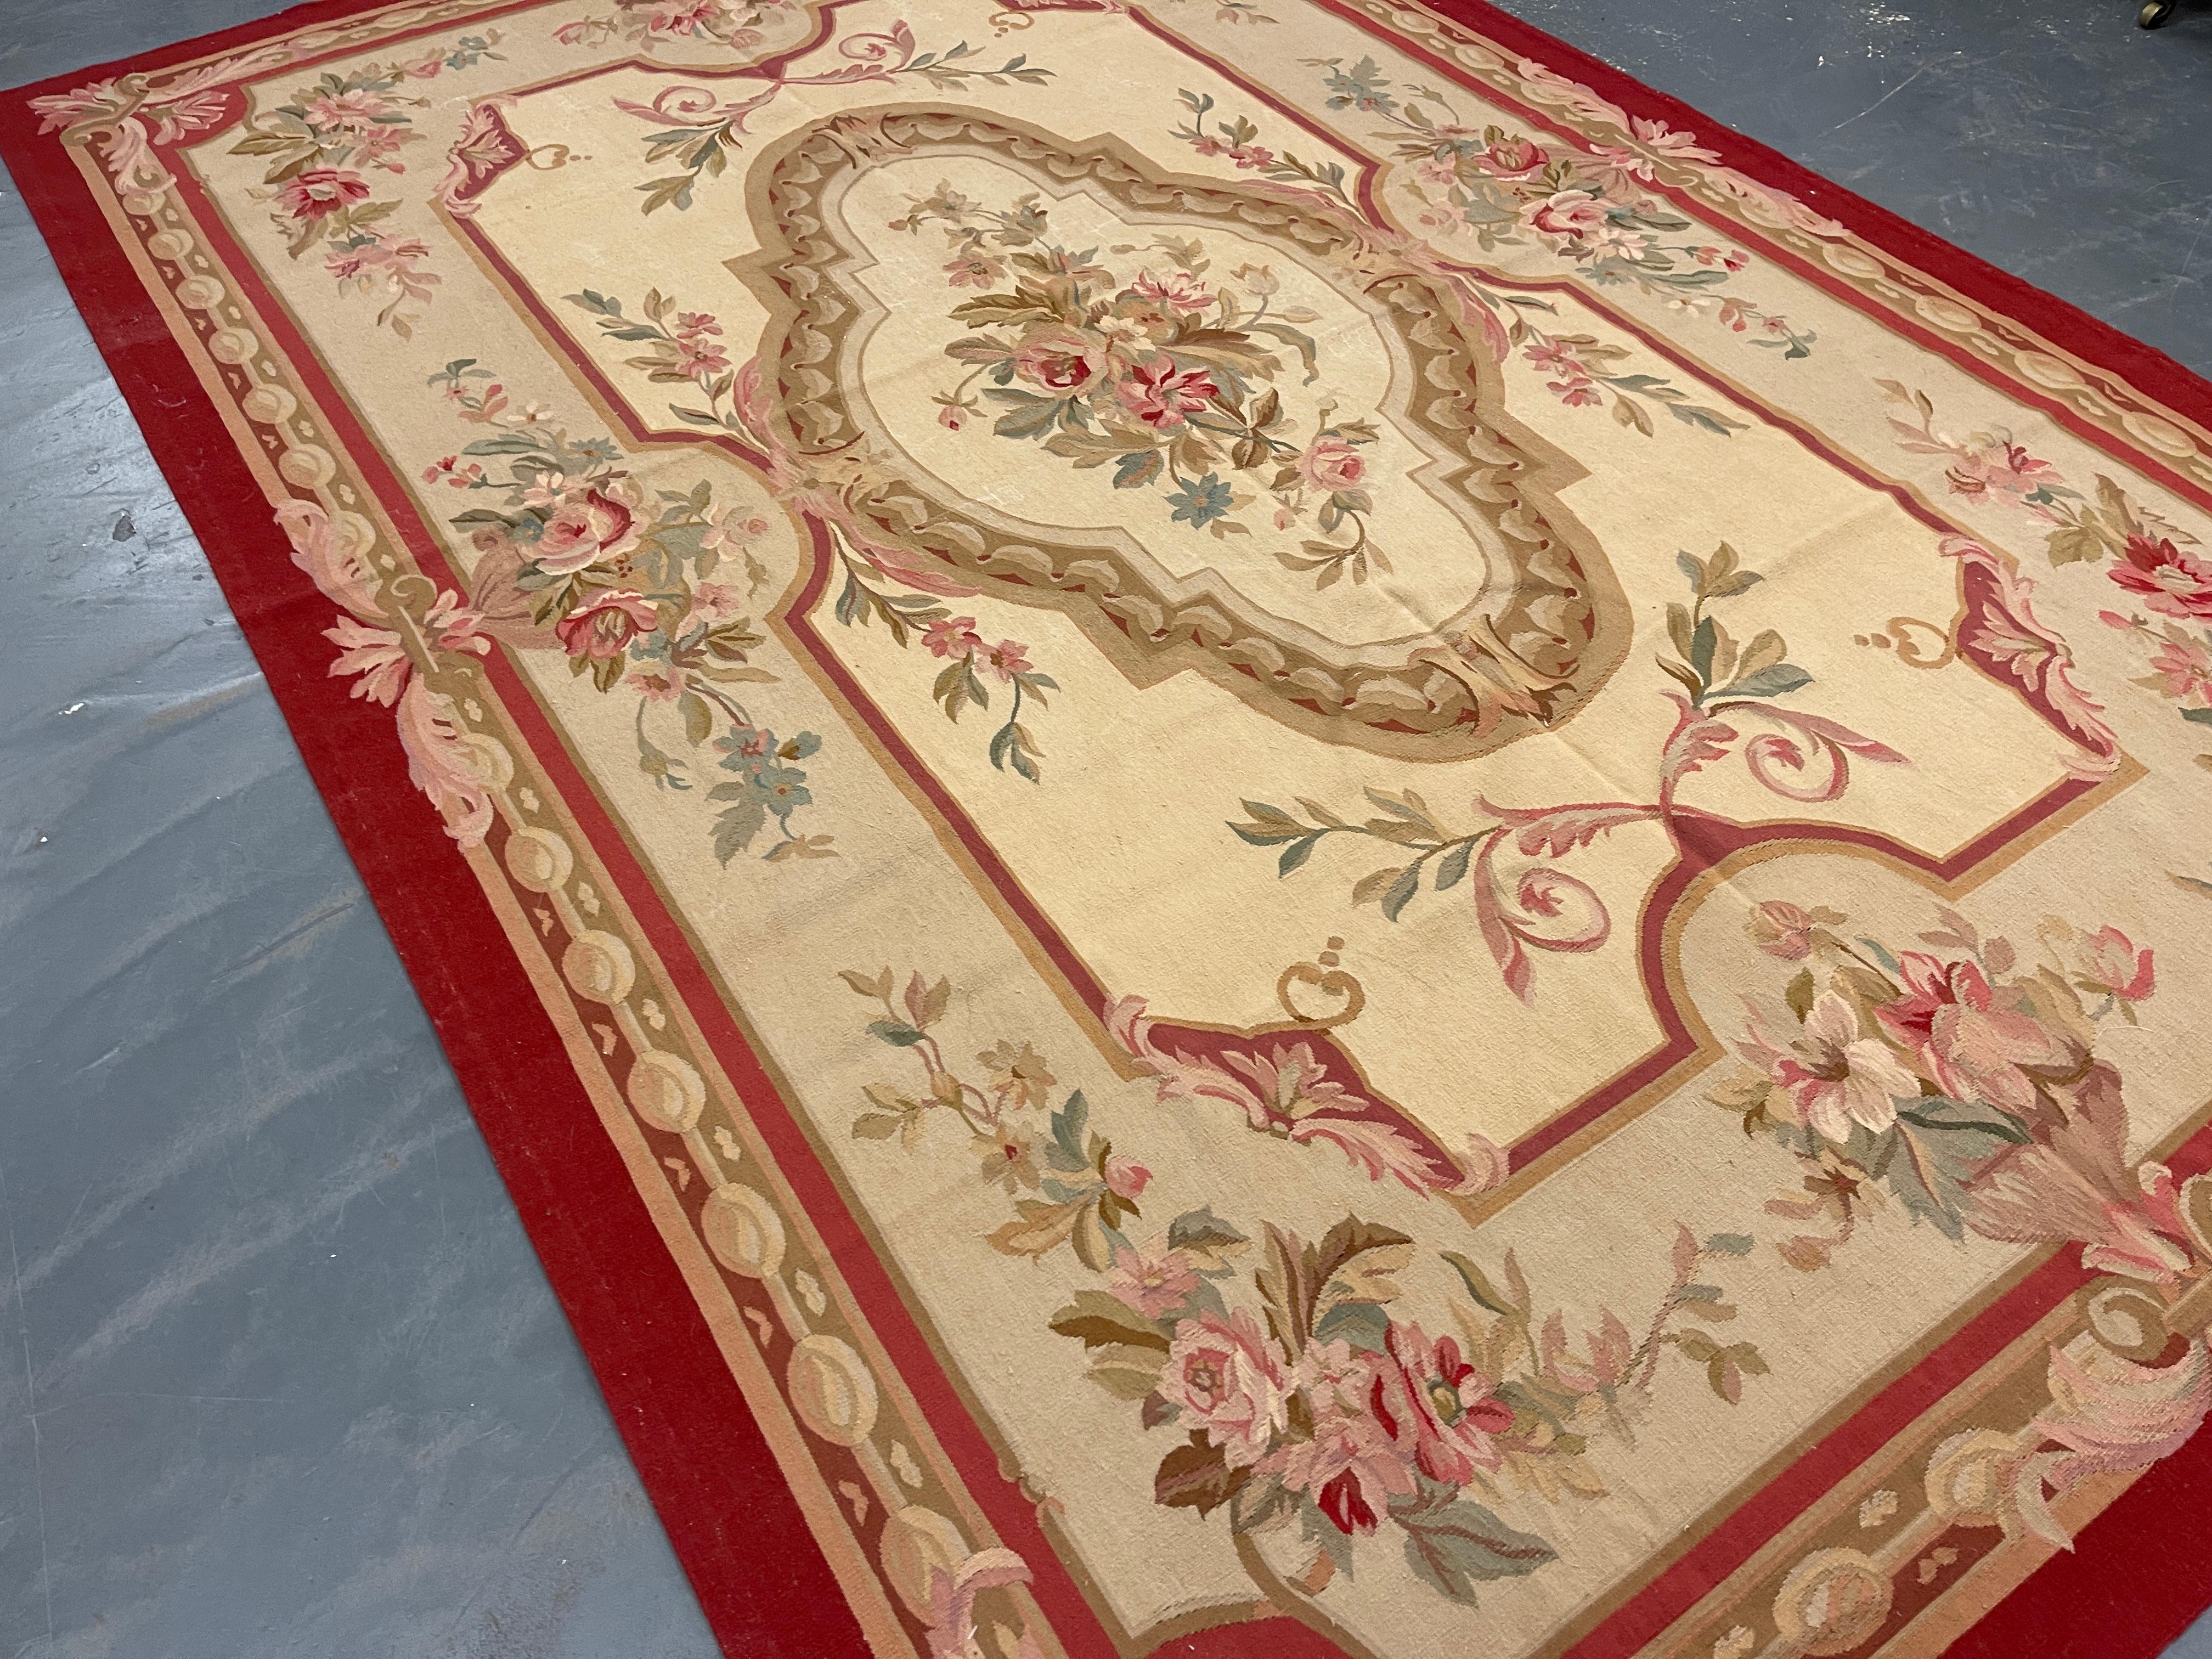 This fantastic area rug has been handwoven with a beautiful, symmetrical floral design woven on an ivory red background with cream green and ivory accents. This elegant piece's colour and design make it the perfect accent rug.
This style of rugs is